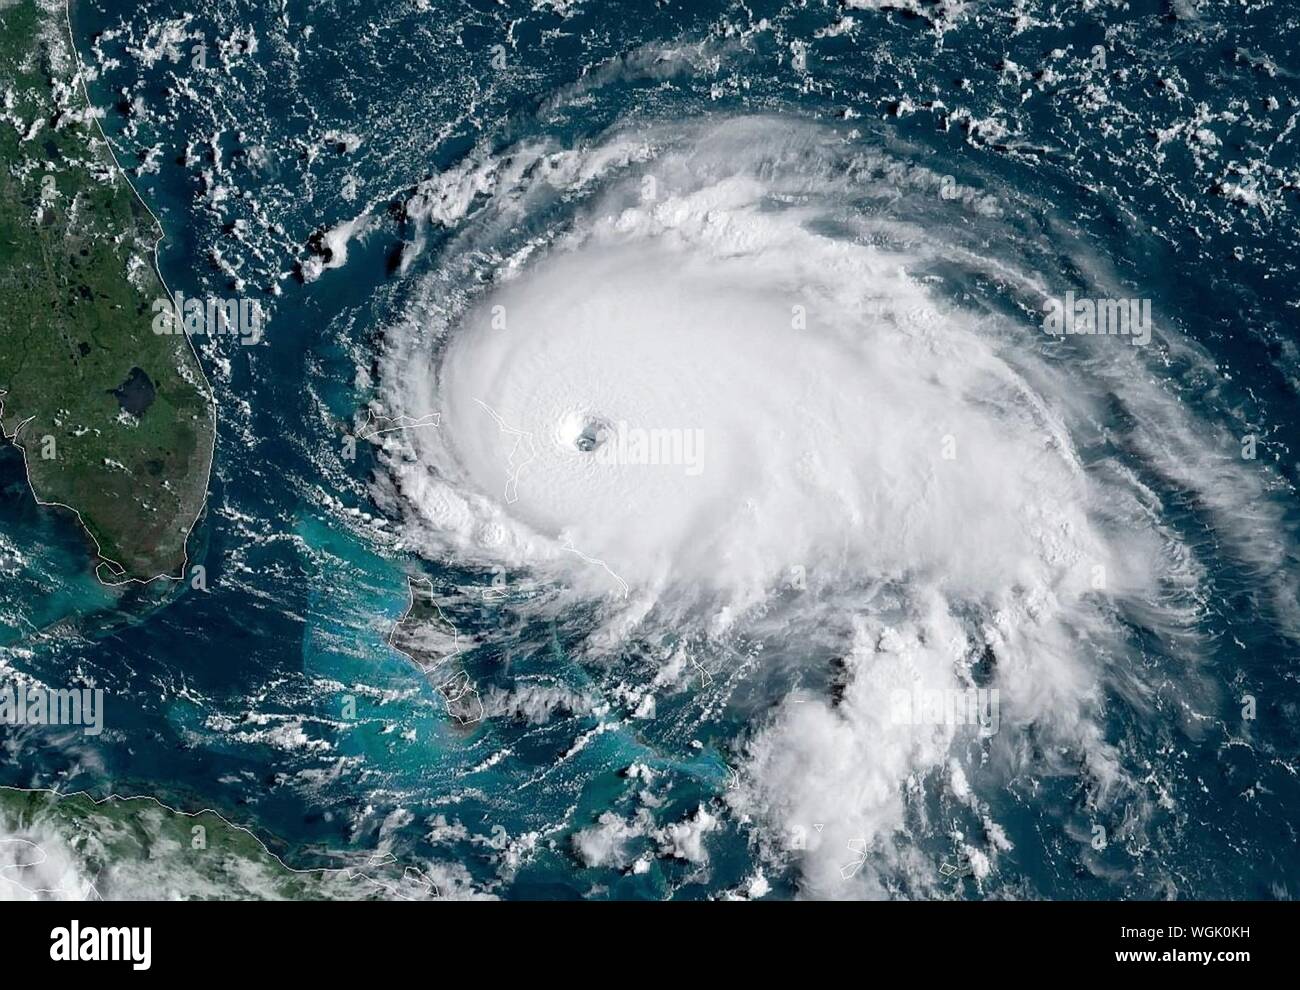 Atlantic Ocean. 1st Sept 2019. NOAA satellite image taken by the GOES-16 satellite showing Hurricane Dorian as it passes the Bahamas September 1, 2019 in the Atlantic Ocean. Dorian struck the small island nation as a Category 5 storm with winds of 185 mph. Credit: NOAA/Planetpix/Alamy Live News Stock Photo